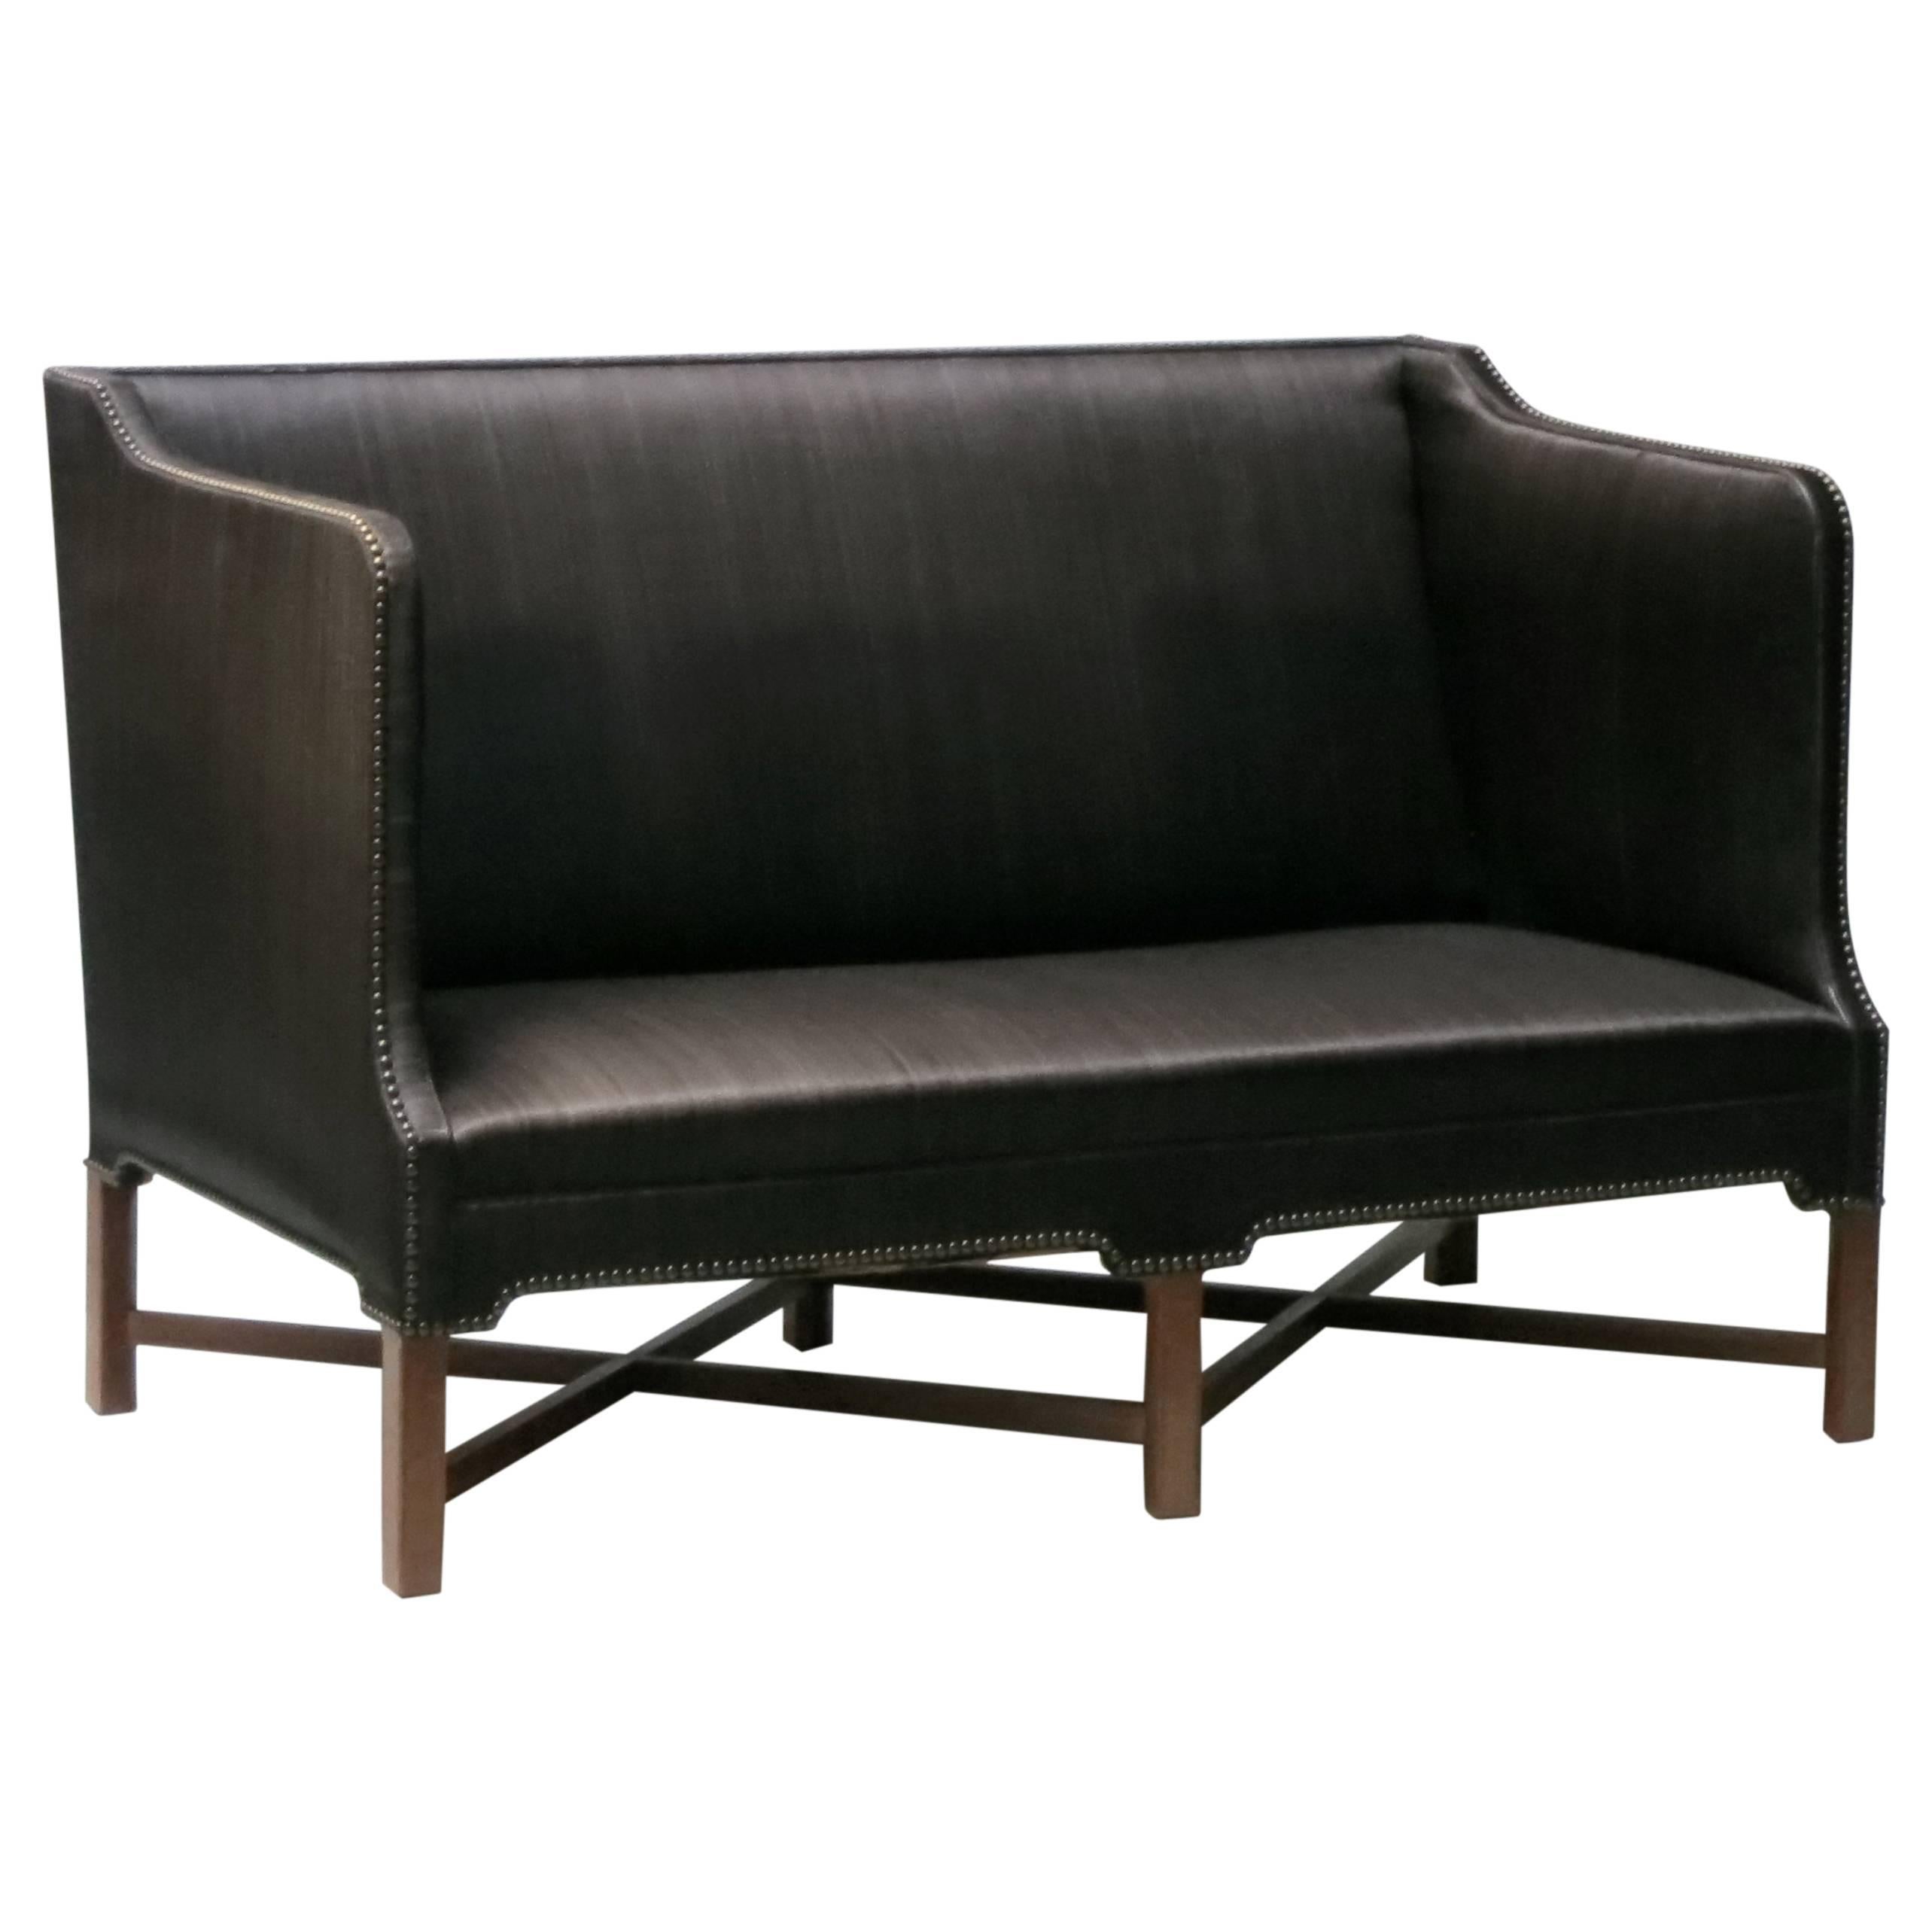 Sofa in Original Black Horsehair with Leather Welts by Kaare Klint